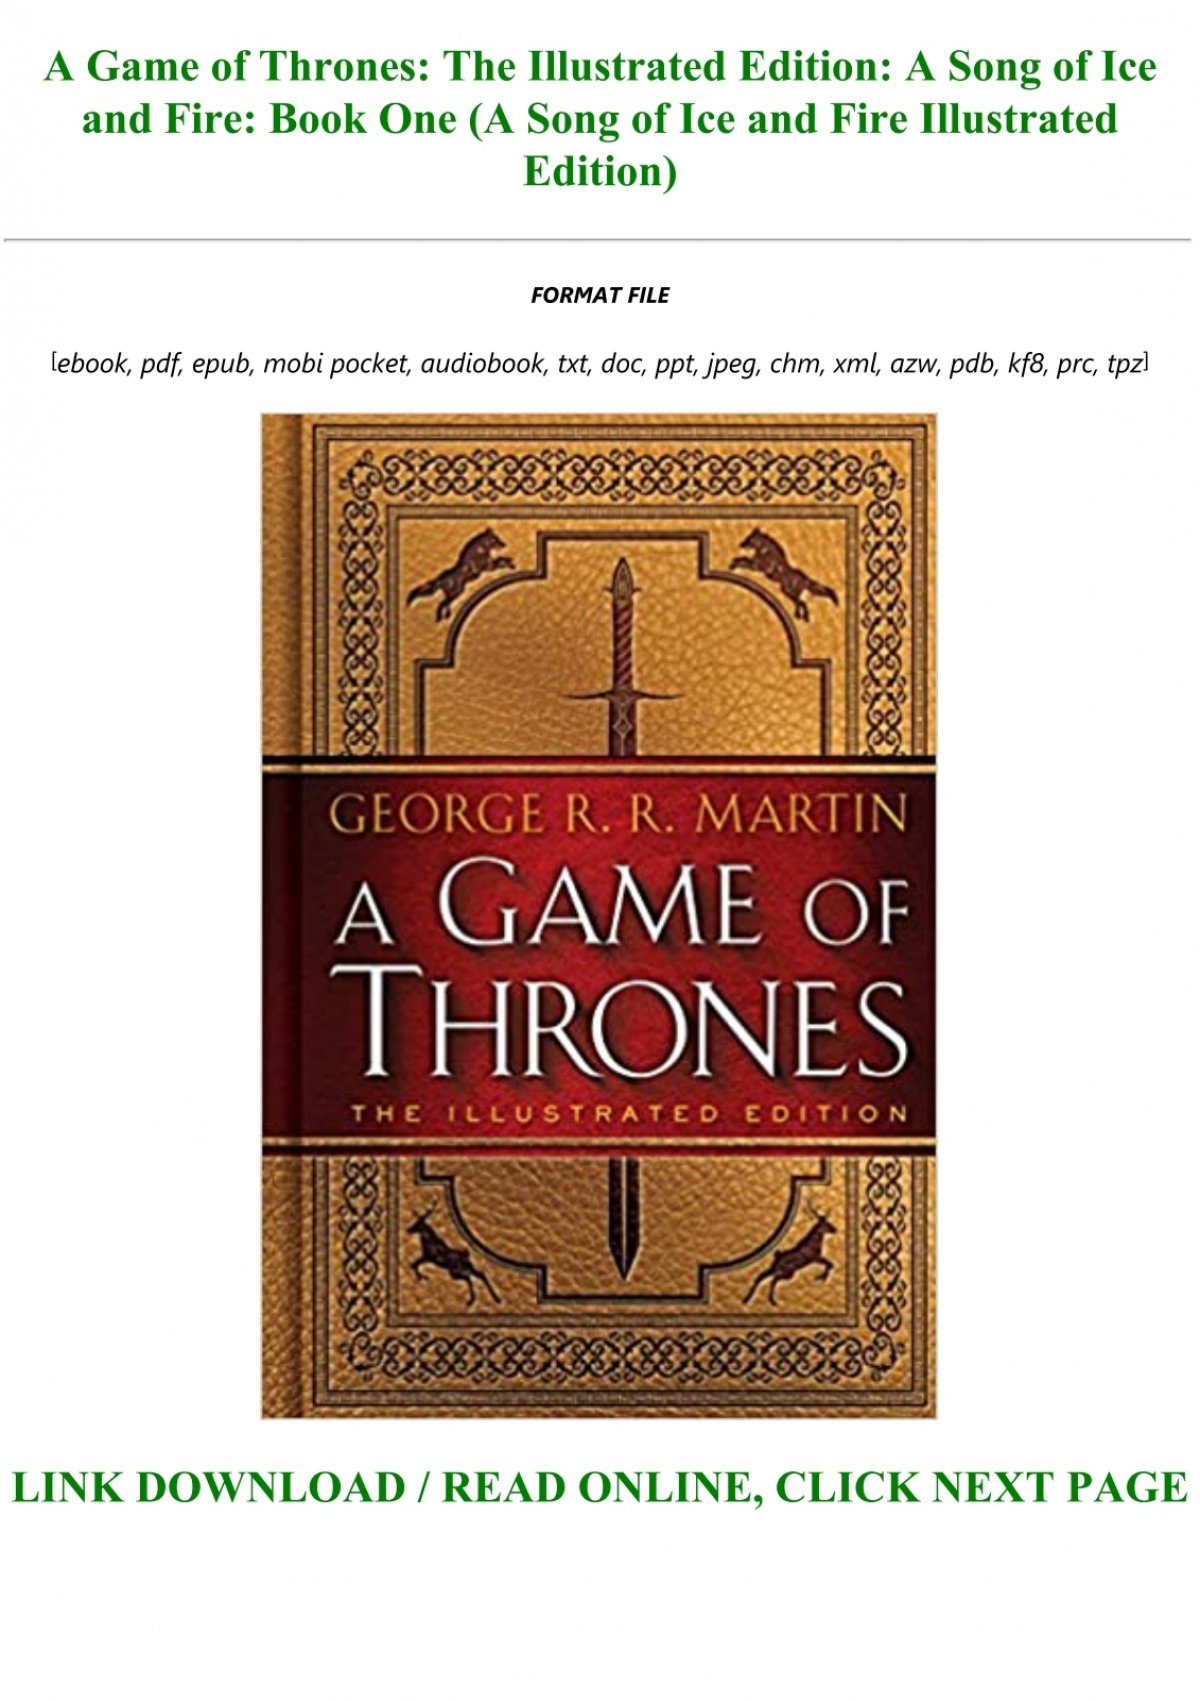 a game of thrones illustrated edition epub download